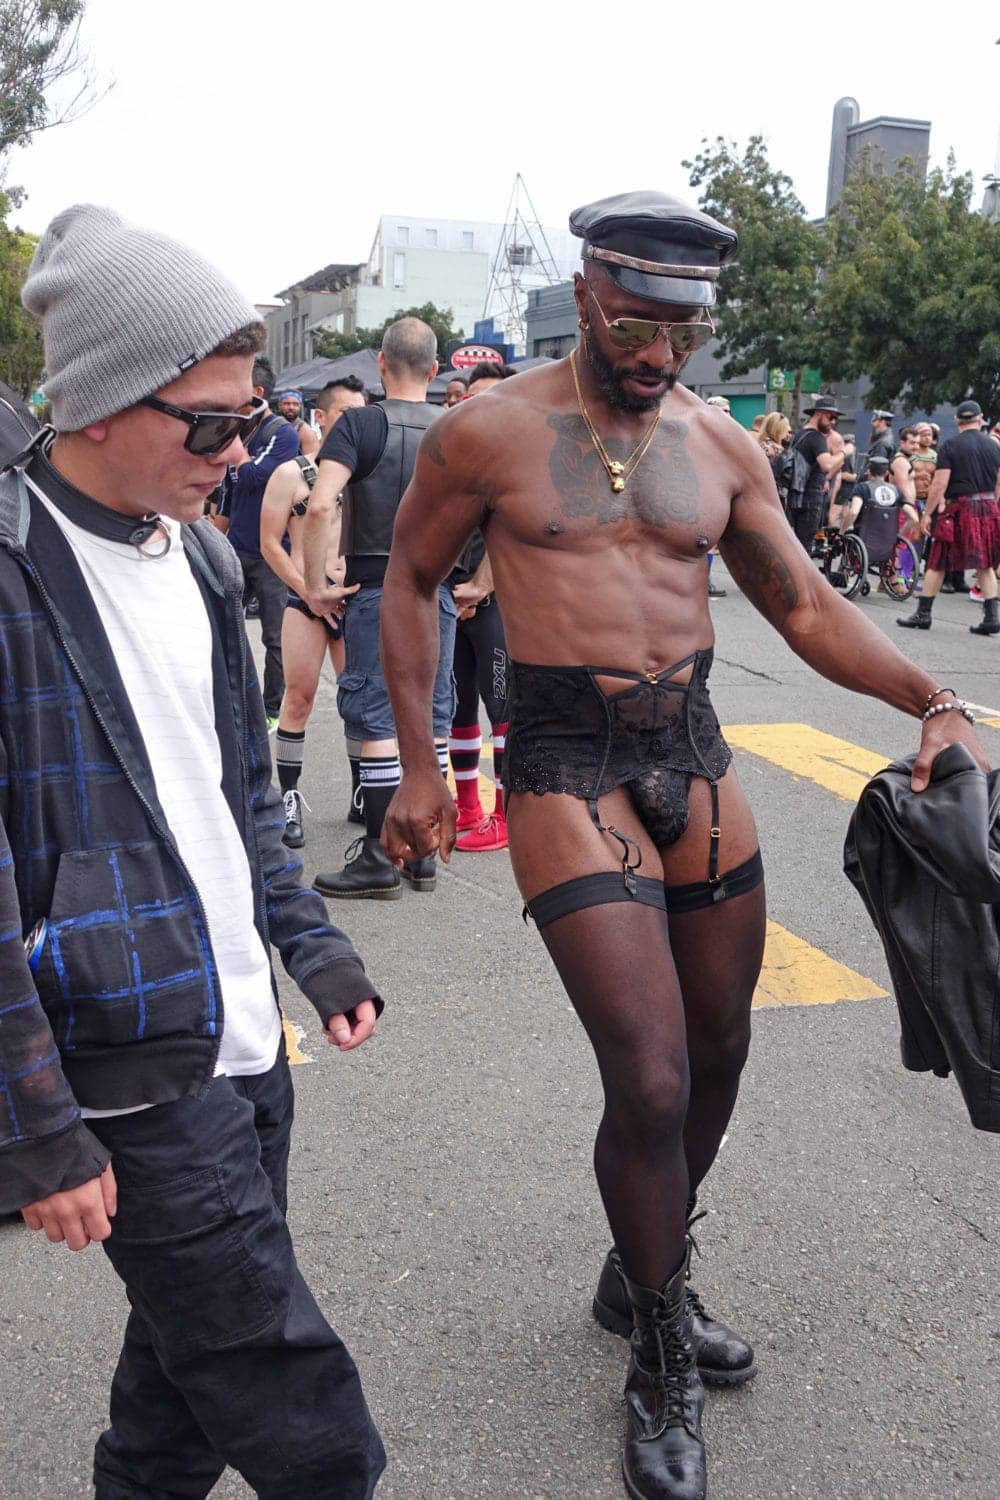 Dore-Alley-‘Up-Your-Alley-even-in-SOMA-San-Francisco-by-Biron-0922, Black and beautiful, out and proud: Why Black queer visibility matters, Culture Currents 